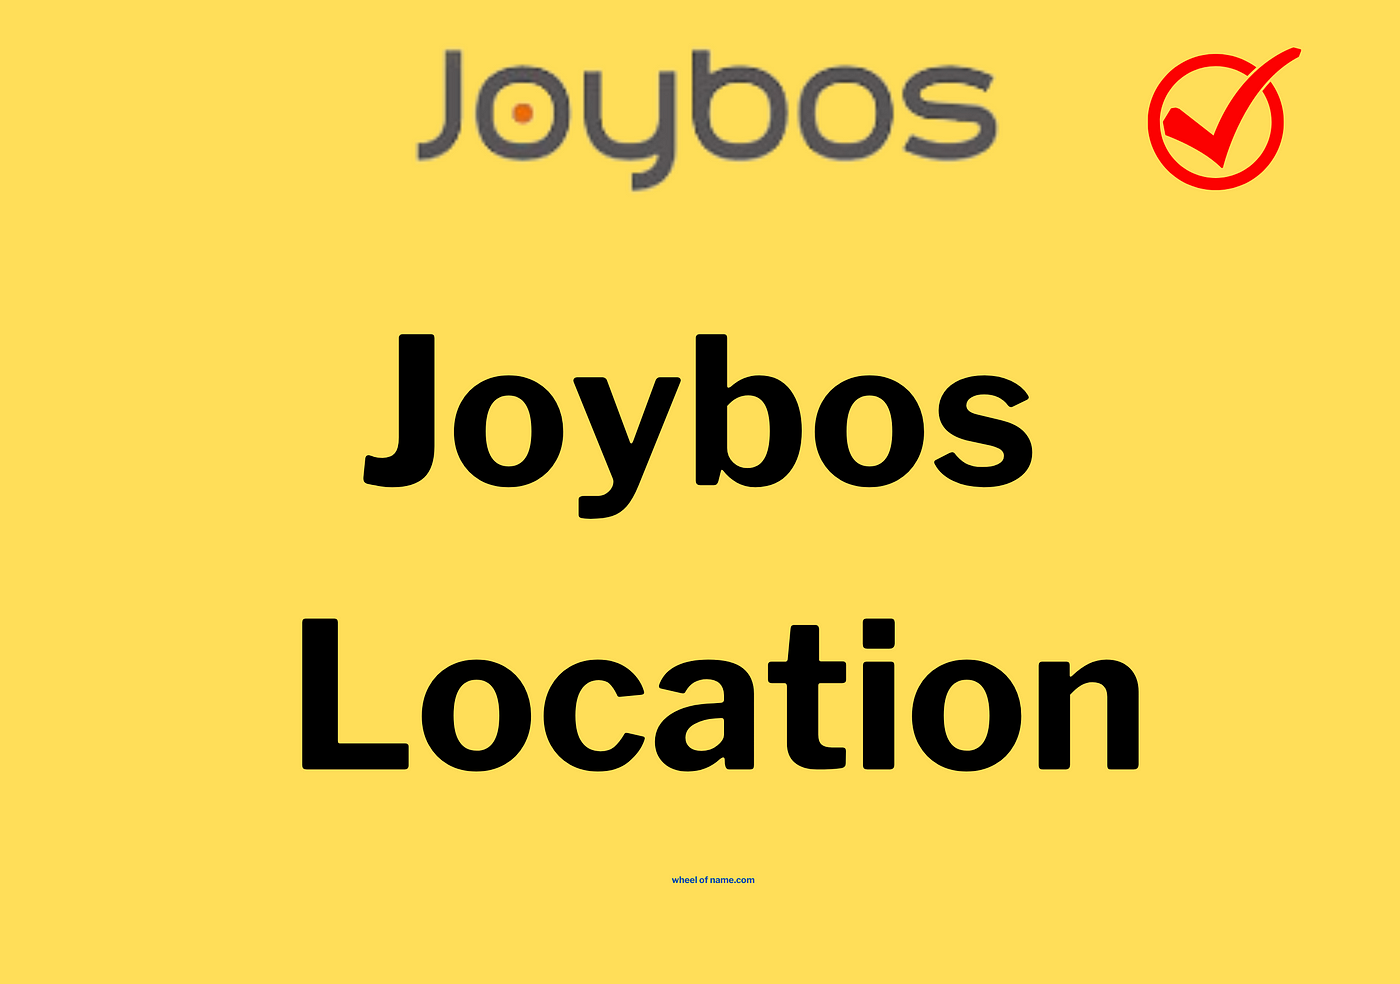 Joybos Location: Find Out Where We Are Based